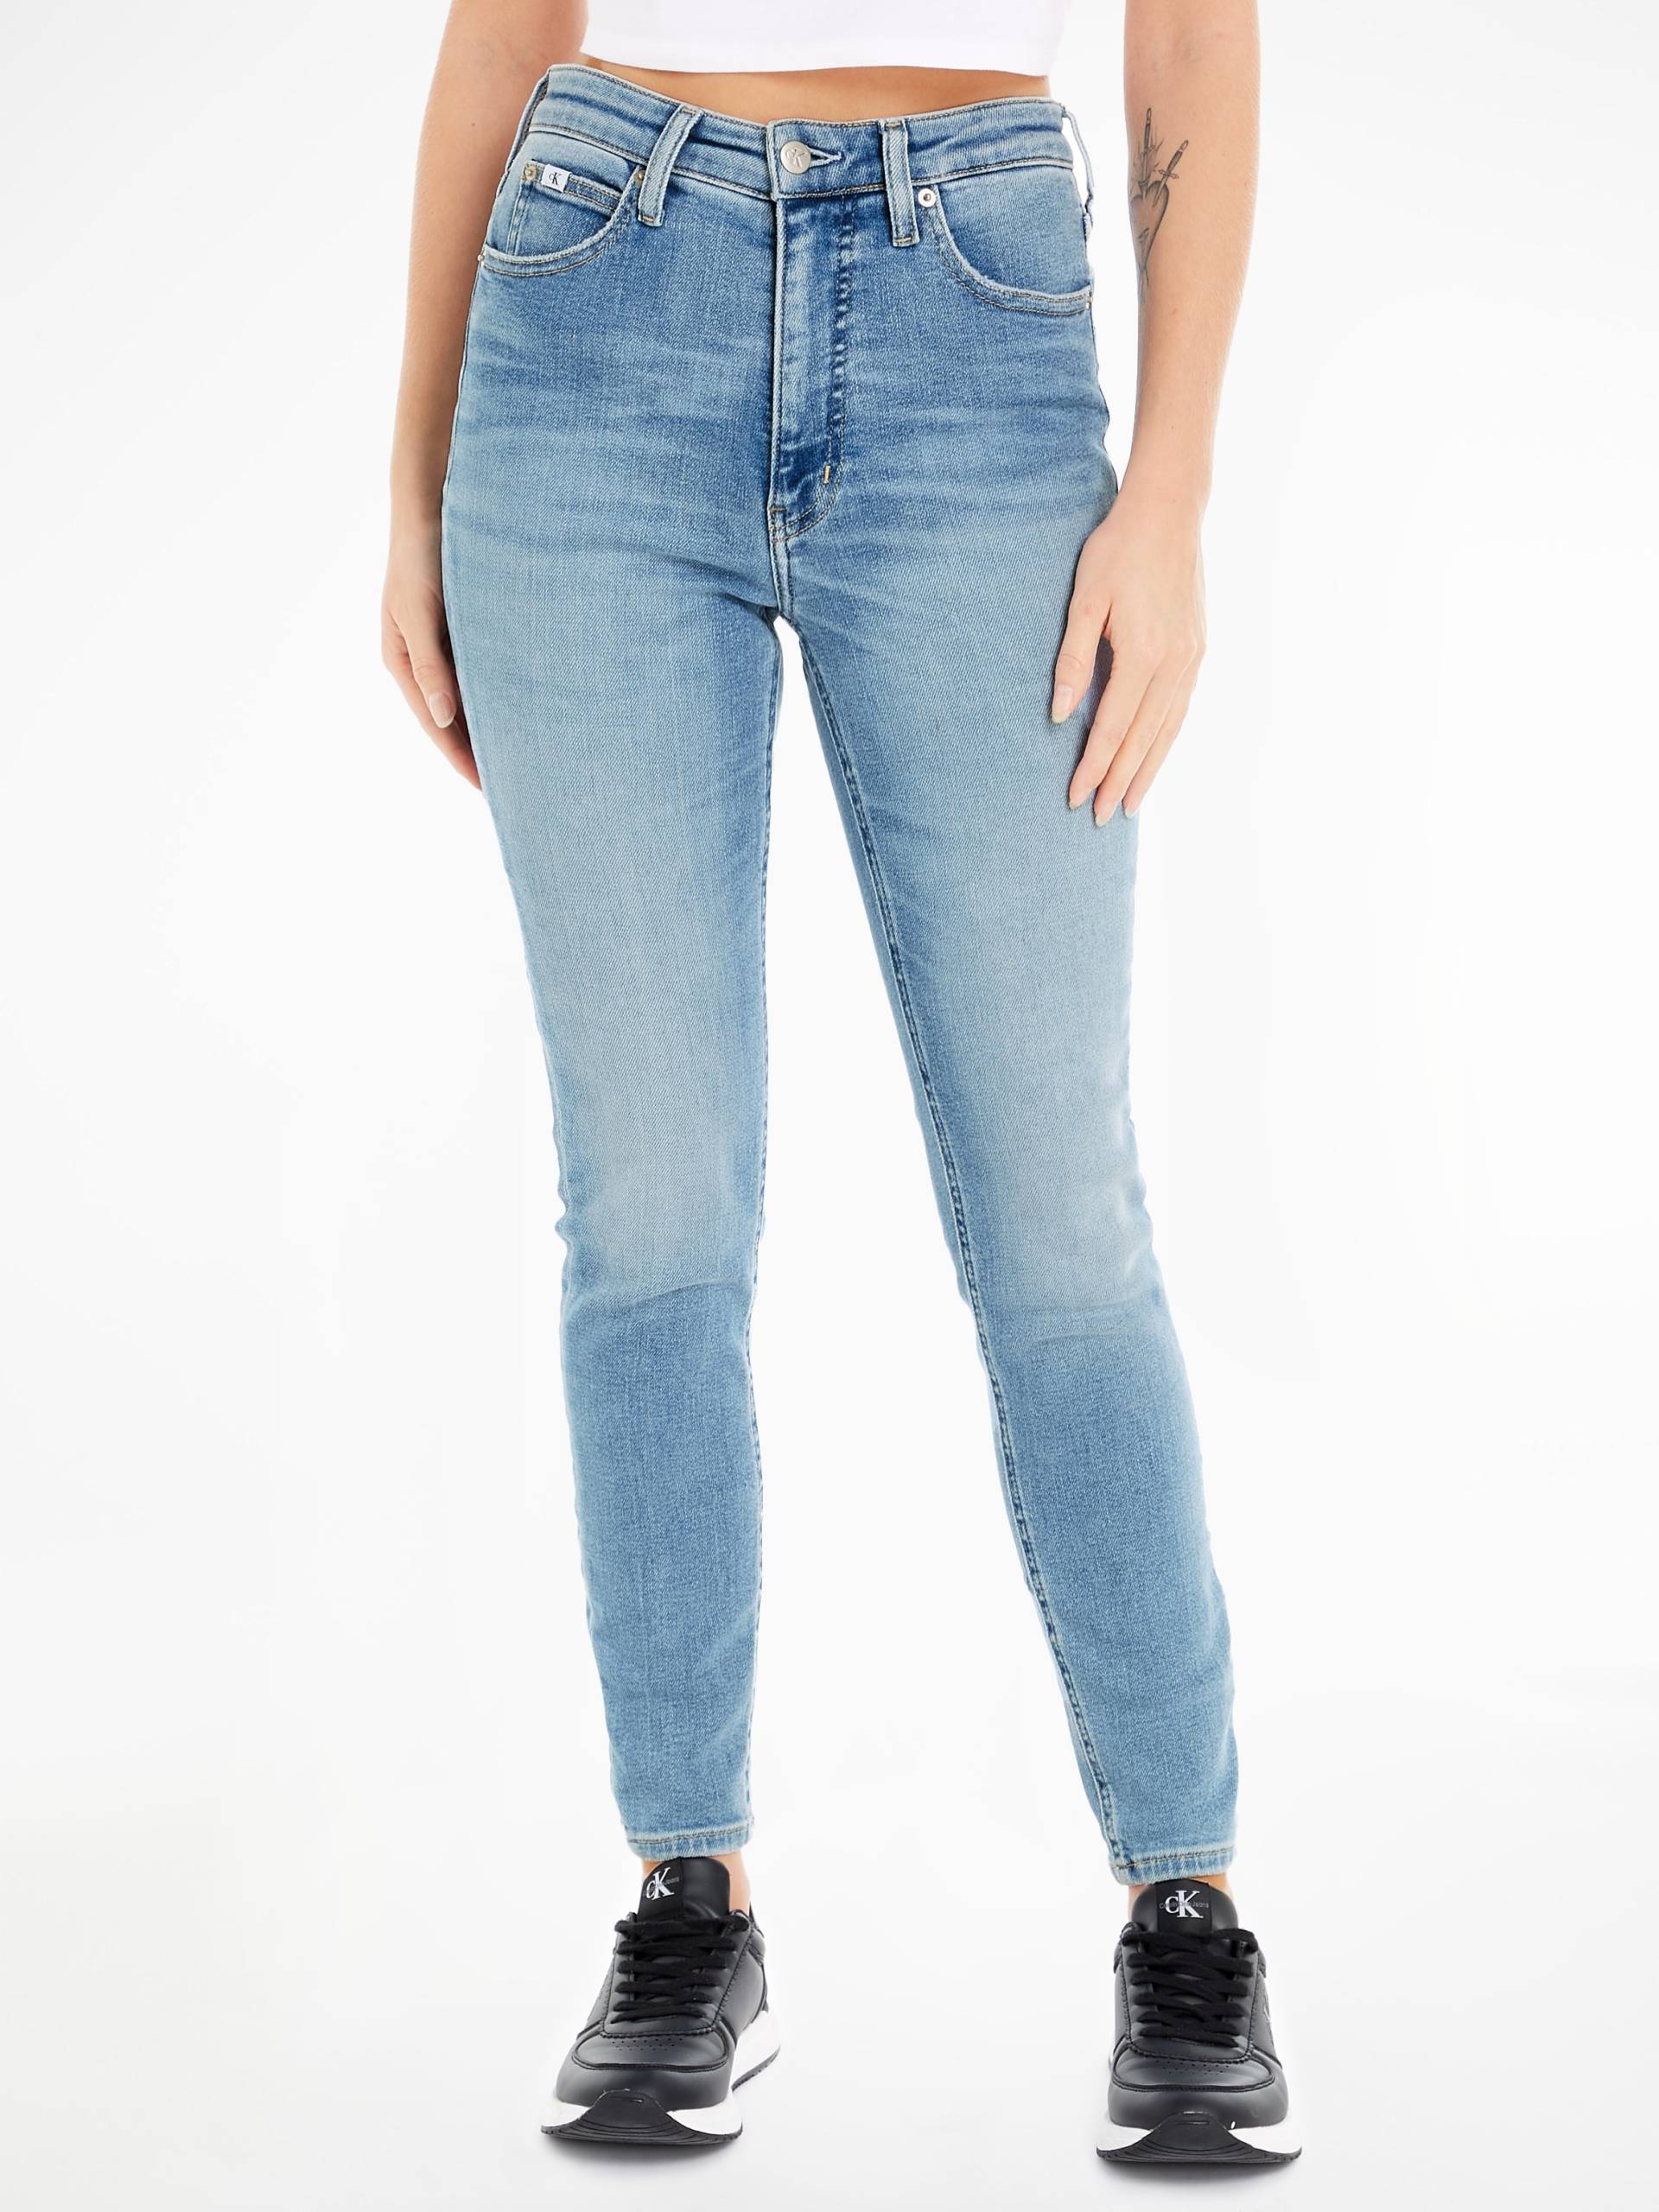 Calvin Klein Jeans Skinny-fit-Jeans »HIGH RISE SUPER SKINNY ANKLE« von Calvin Klein Jeans